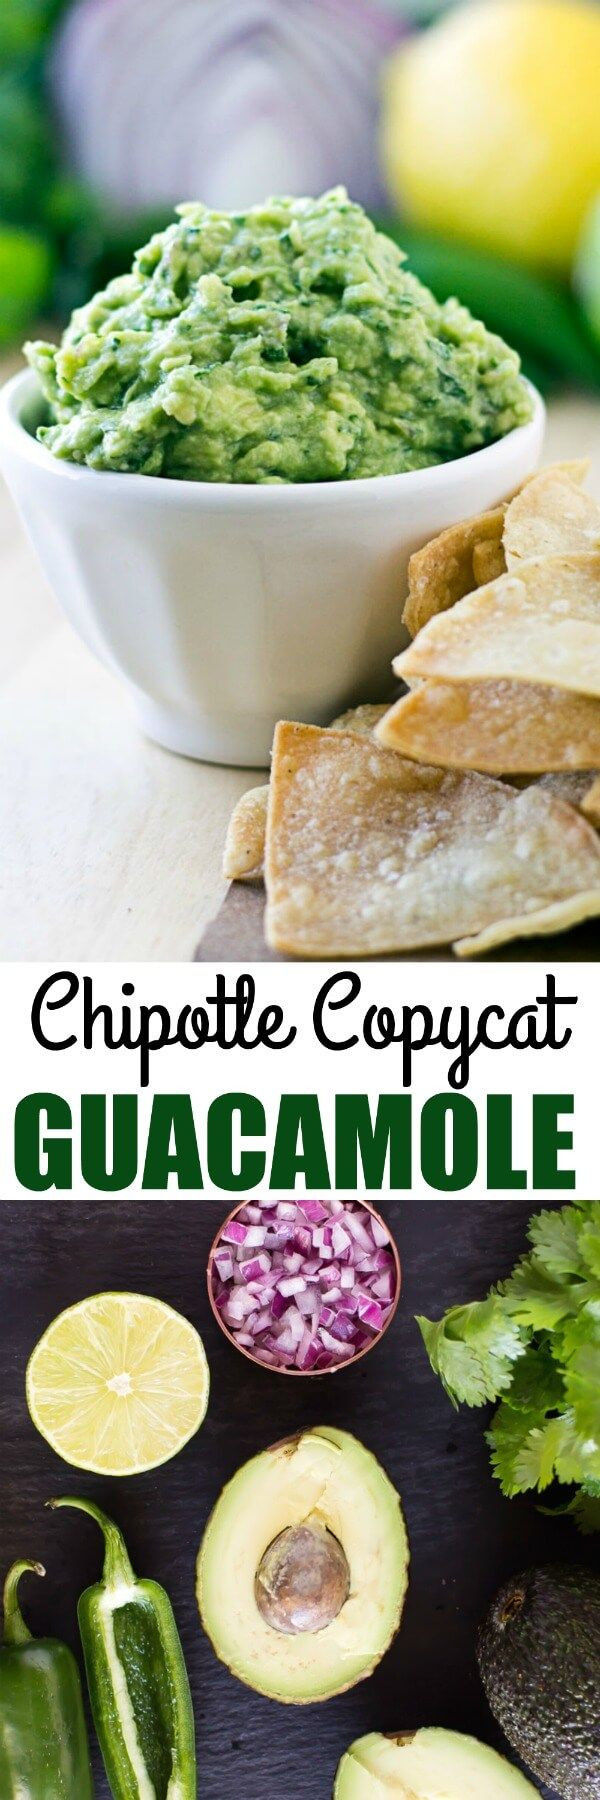 Is Chipotle Guacamole Healthy
 Healthy Recipes A quick and easy lunch idea for those